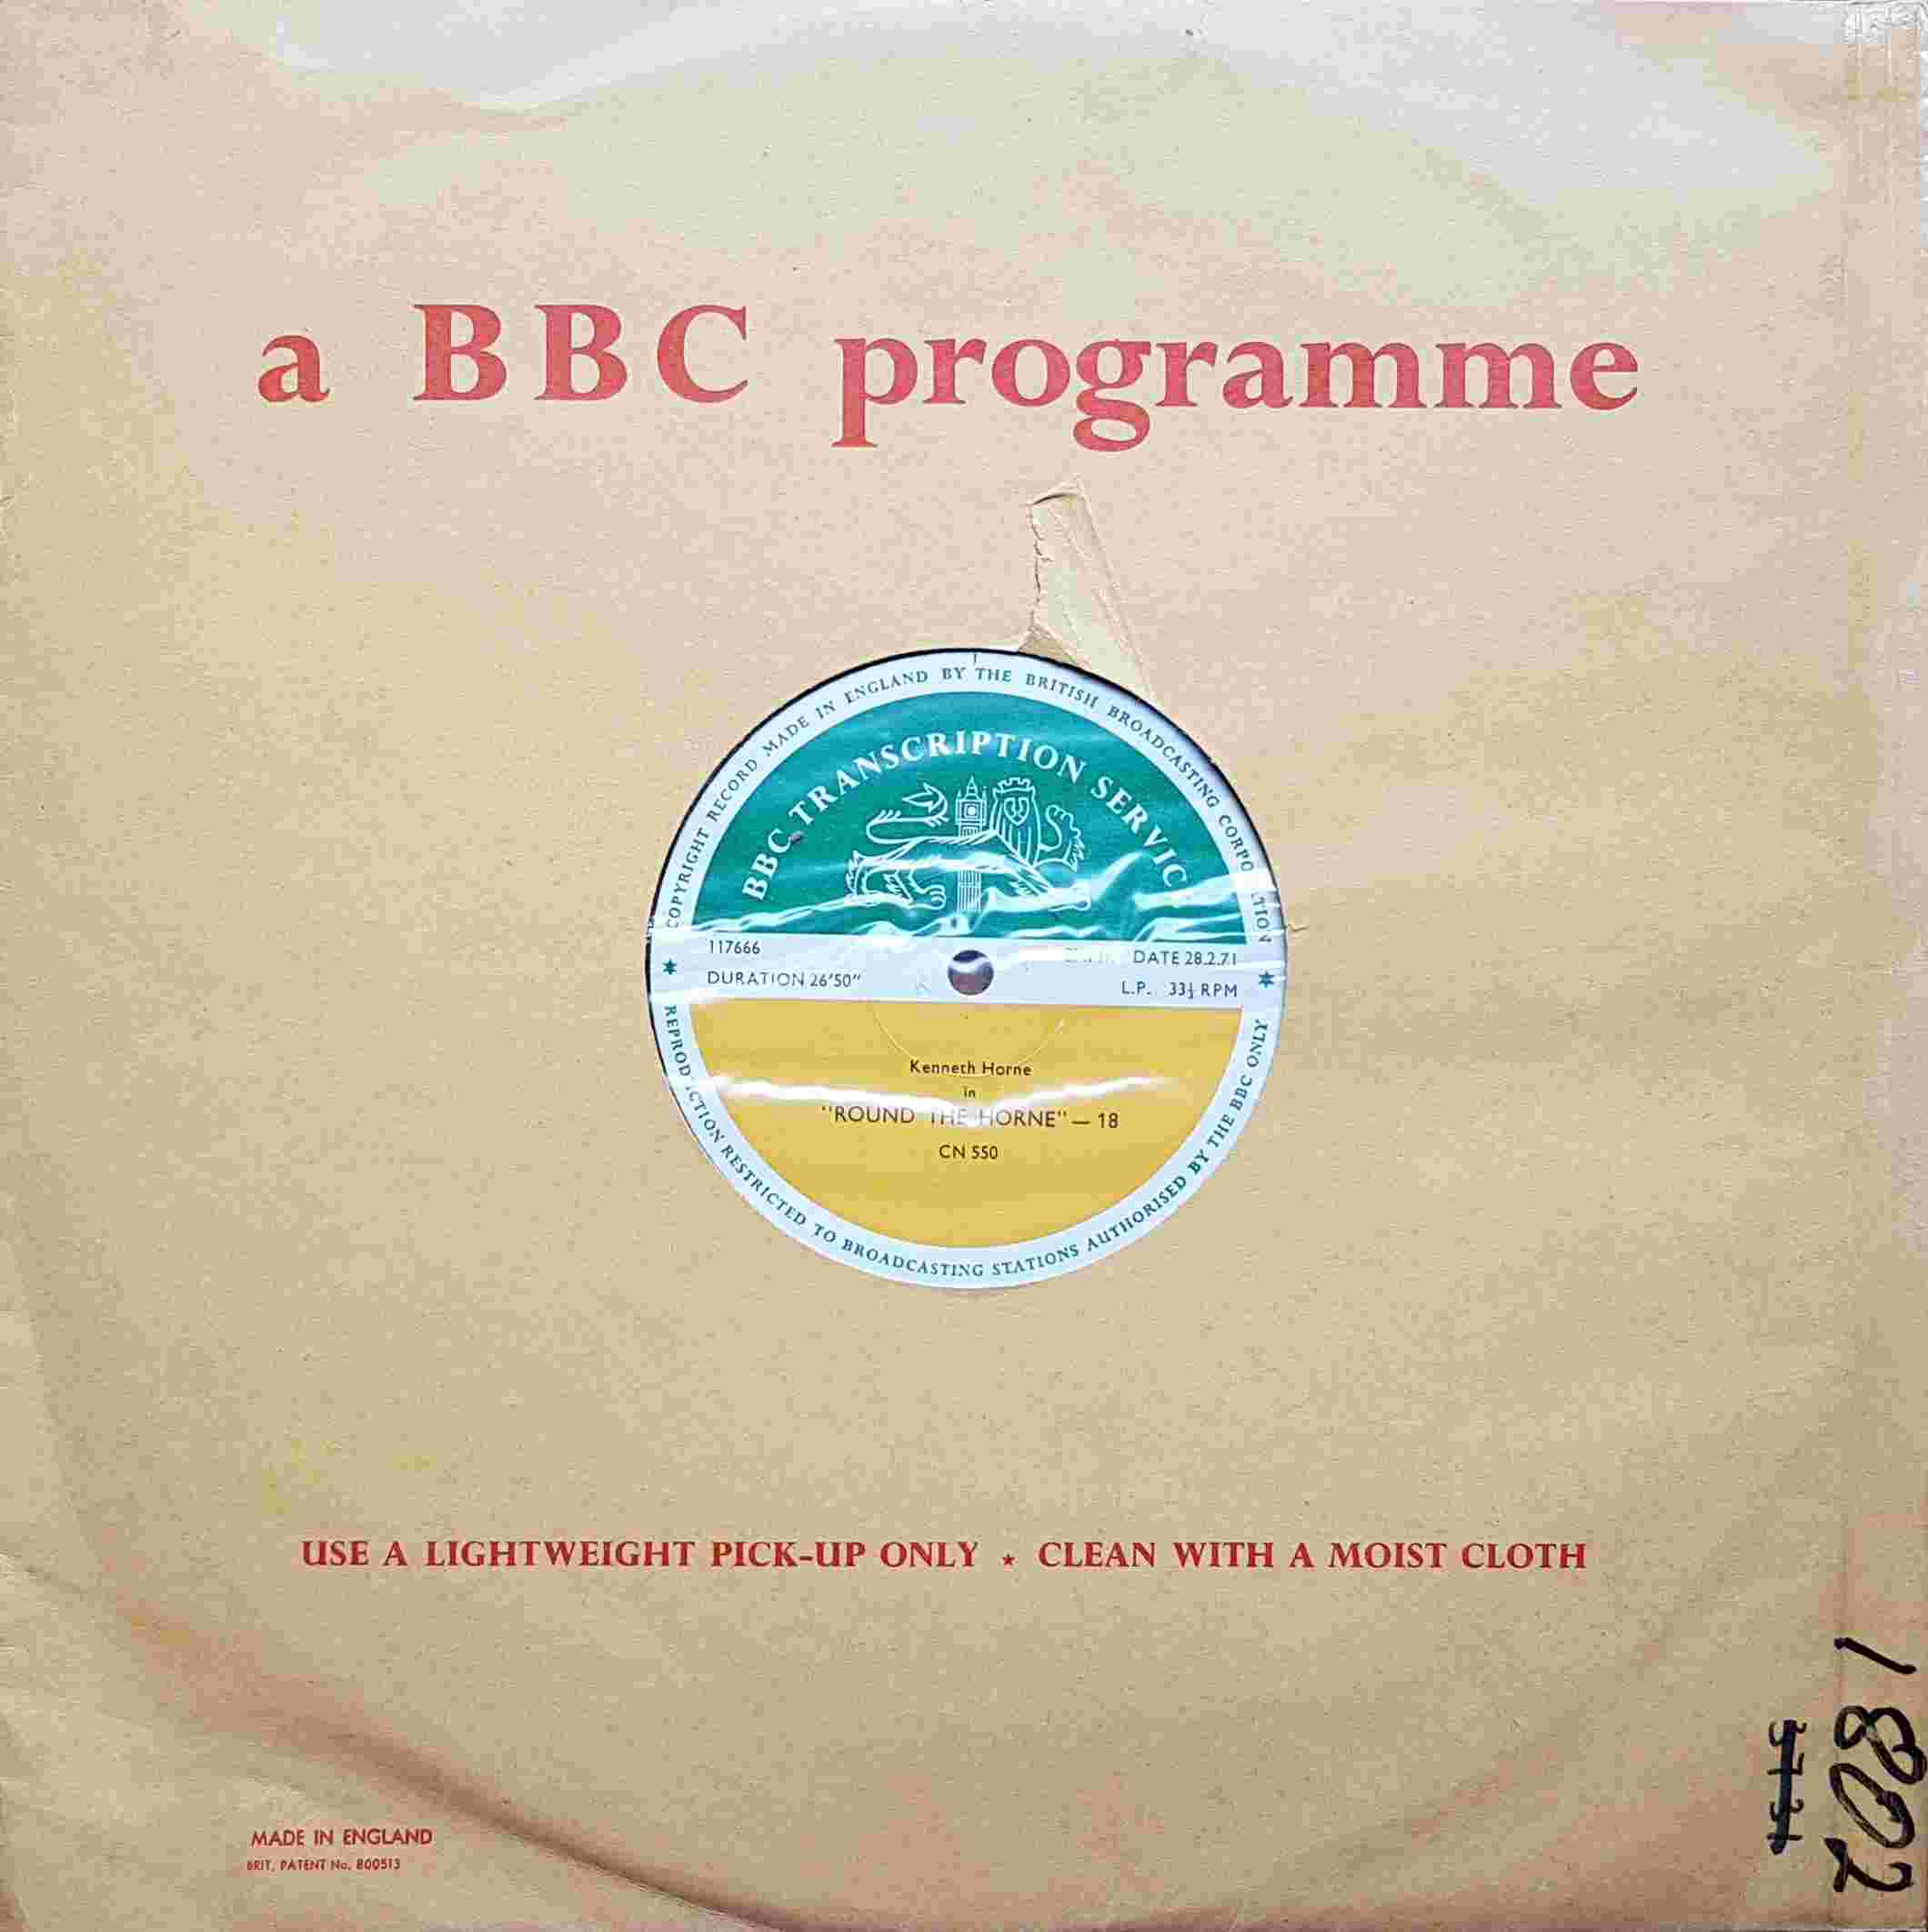 Picture of CN 550 10 Round the Horne - 18 & 19 by artist Kenneth Horne from the BBC records and Tapes library